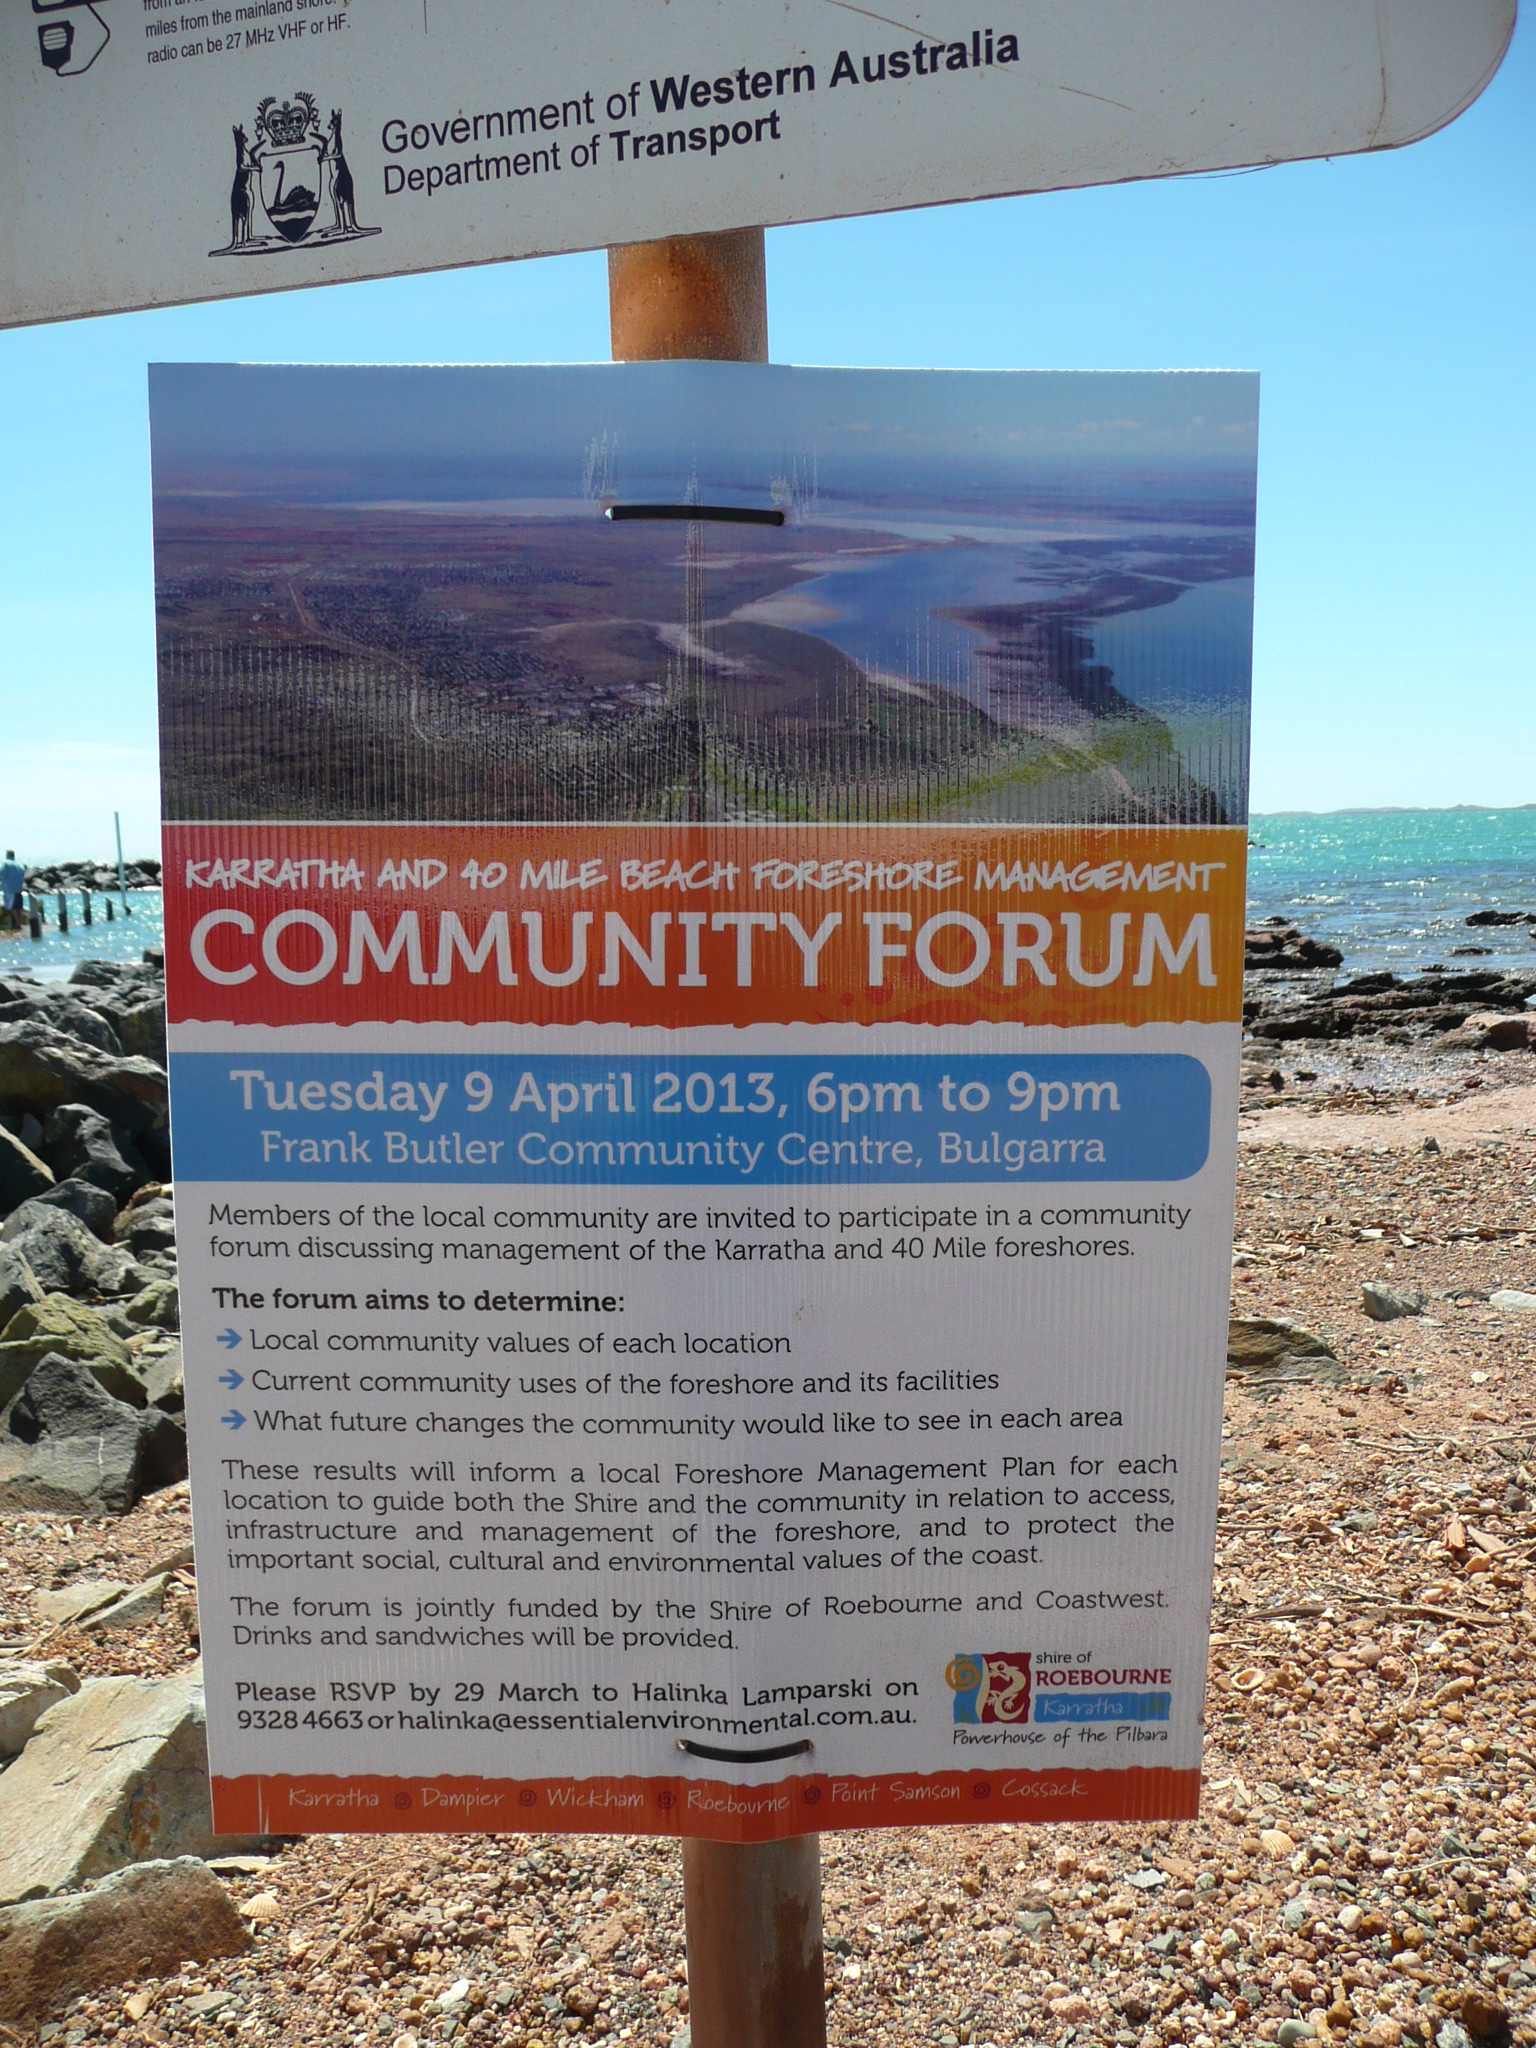 Advertising at Karratha foreshore for our community forum!